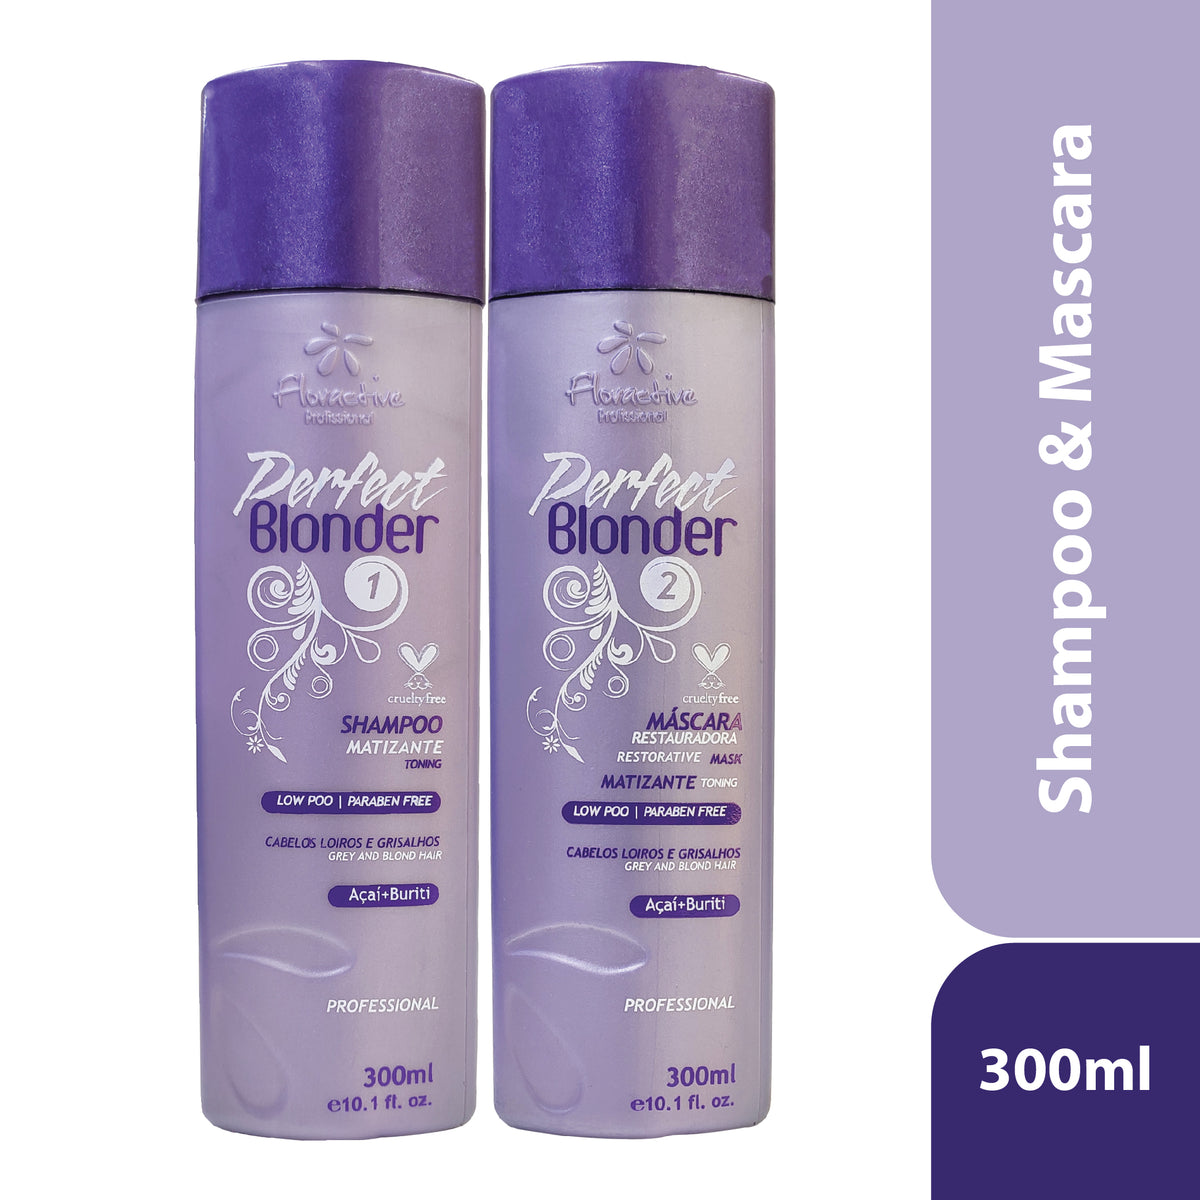 Floractive Profissional Perfect Blonder Shampoo and Conditioner Combo (300ml) Beautiful